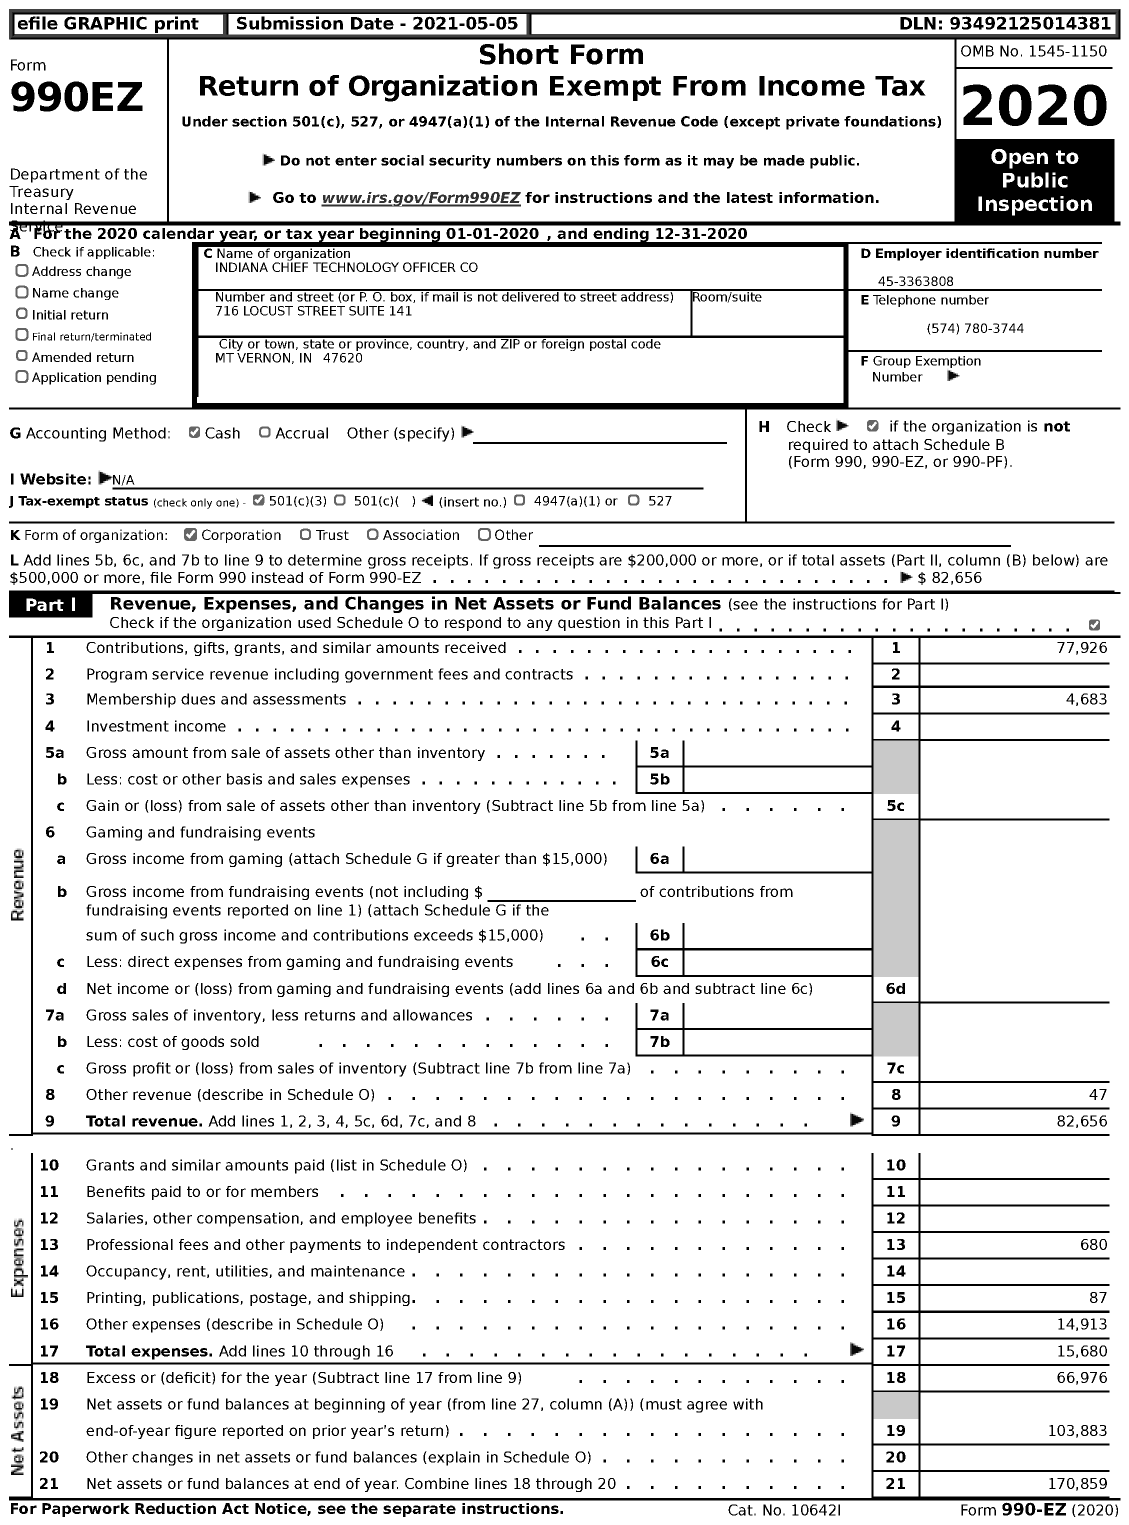 Image of first page of 2020 Form 990EZ for Indiana Chief Technology Officer